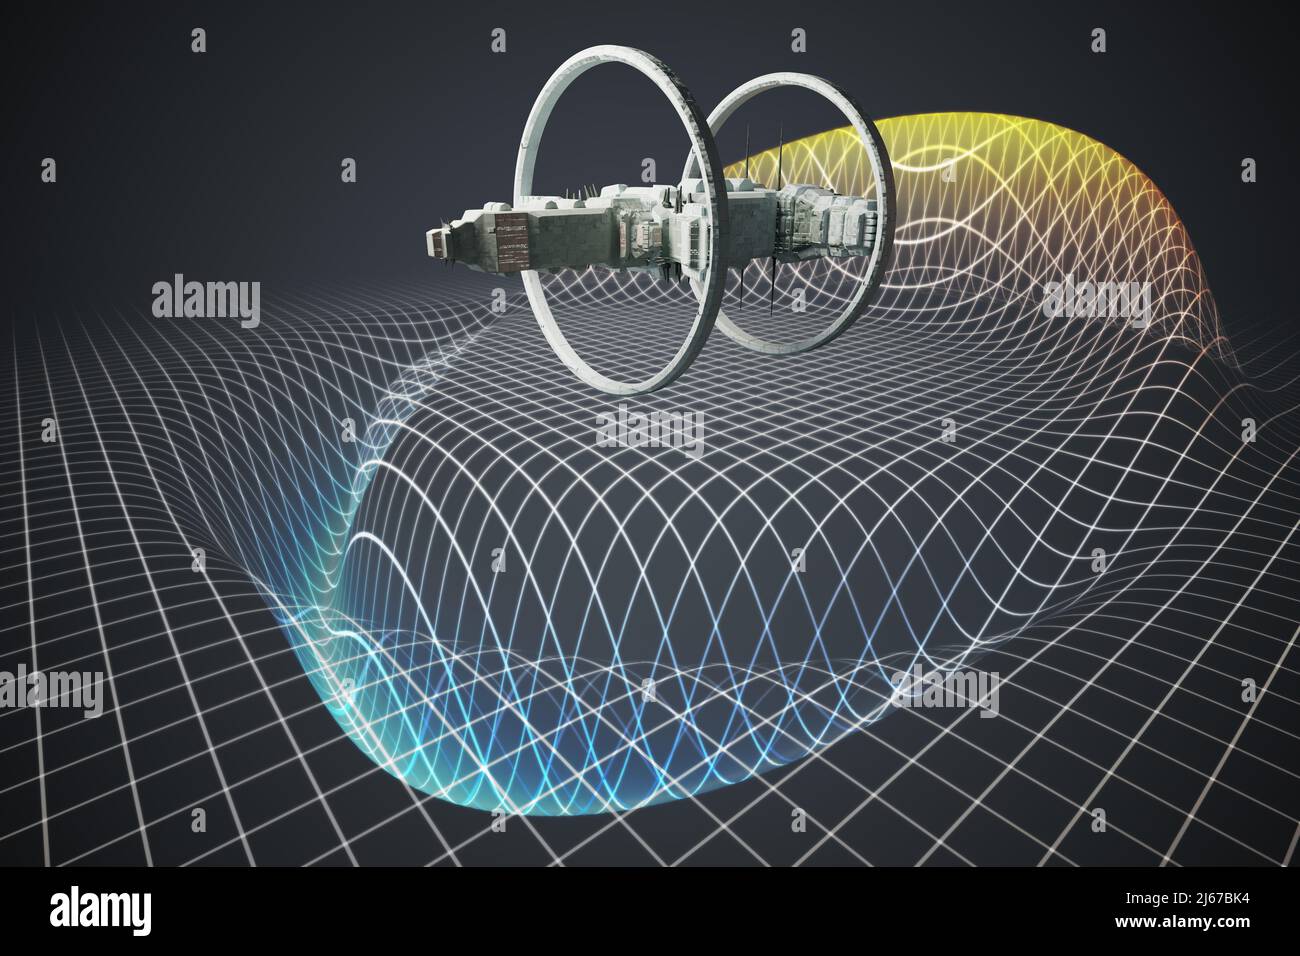 Spaceship with warp drive in curved hyper space. 3D rendered illustration. Stock Photo